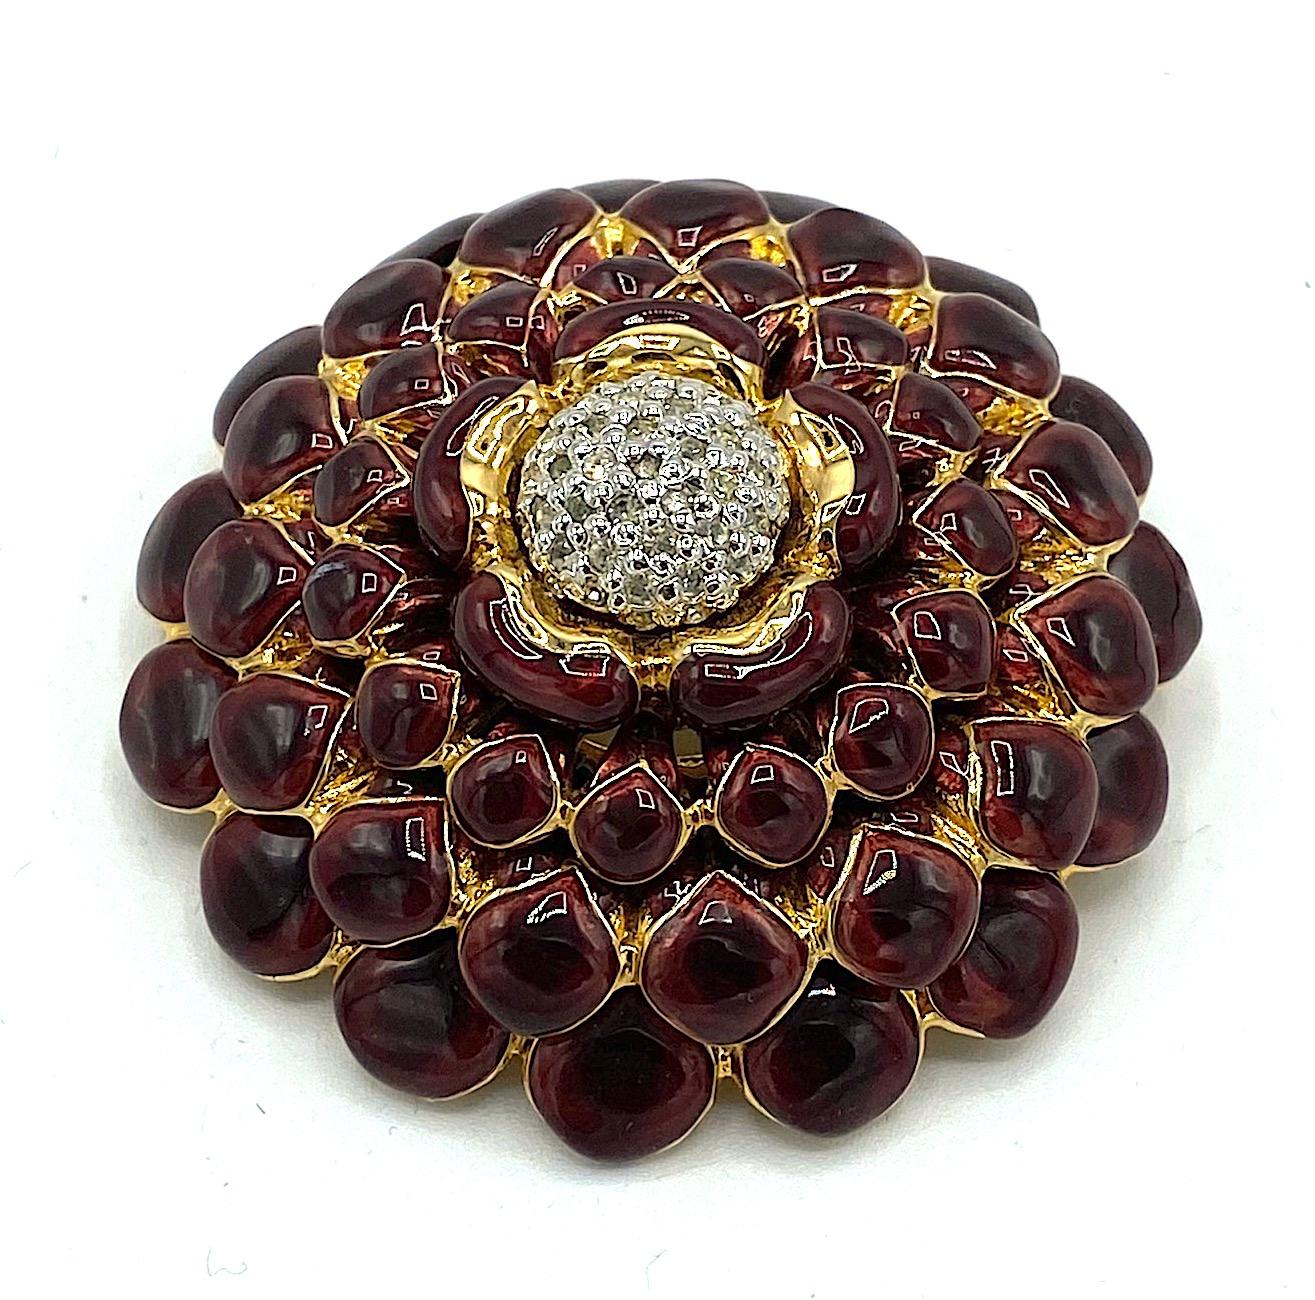 A beautifully made dark purple plum enamel on gold flower brooch by famous fashion designer Judith Leiber. The craftsmanship is super as all her creations are known to be. Judith's jewelry pieces were made in limited and small collections. The plum